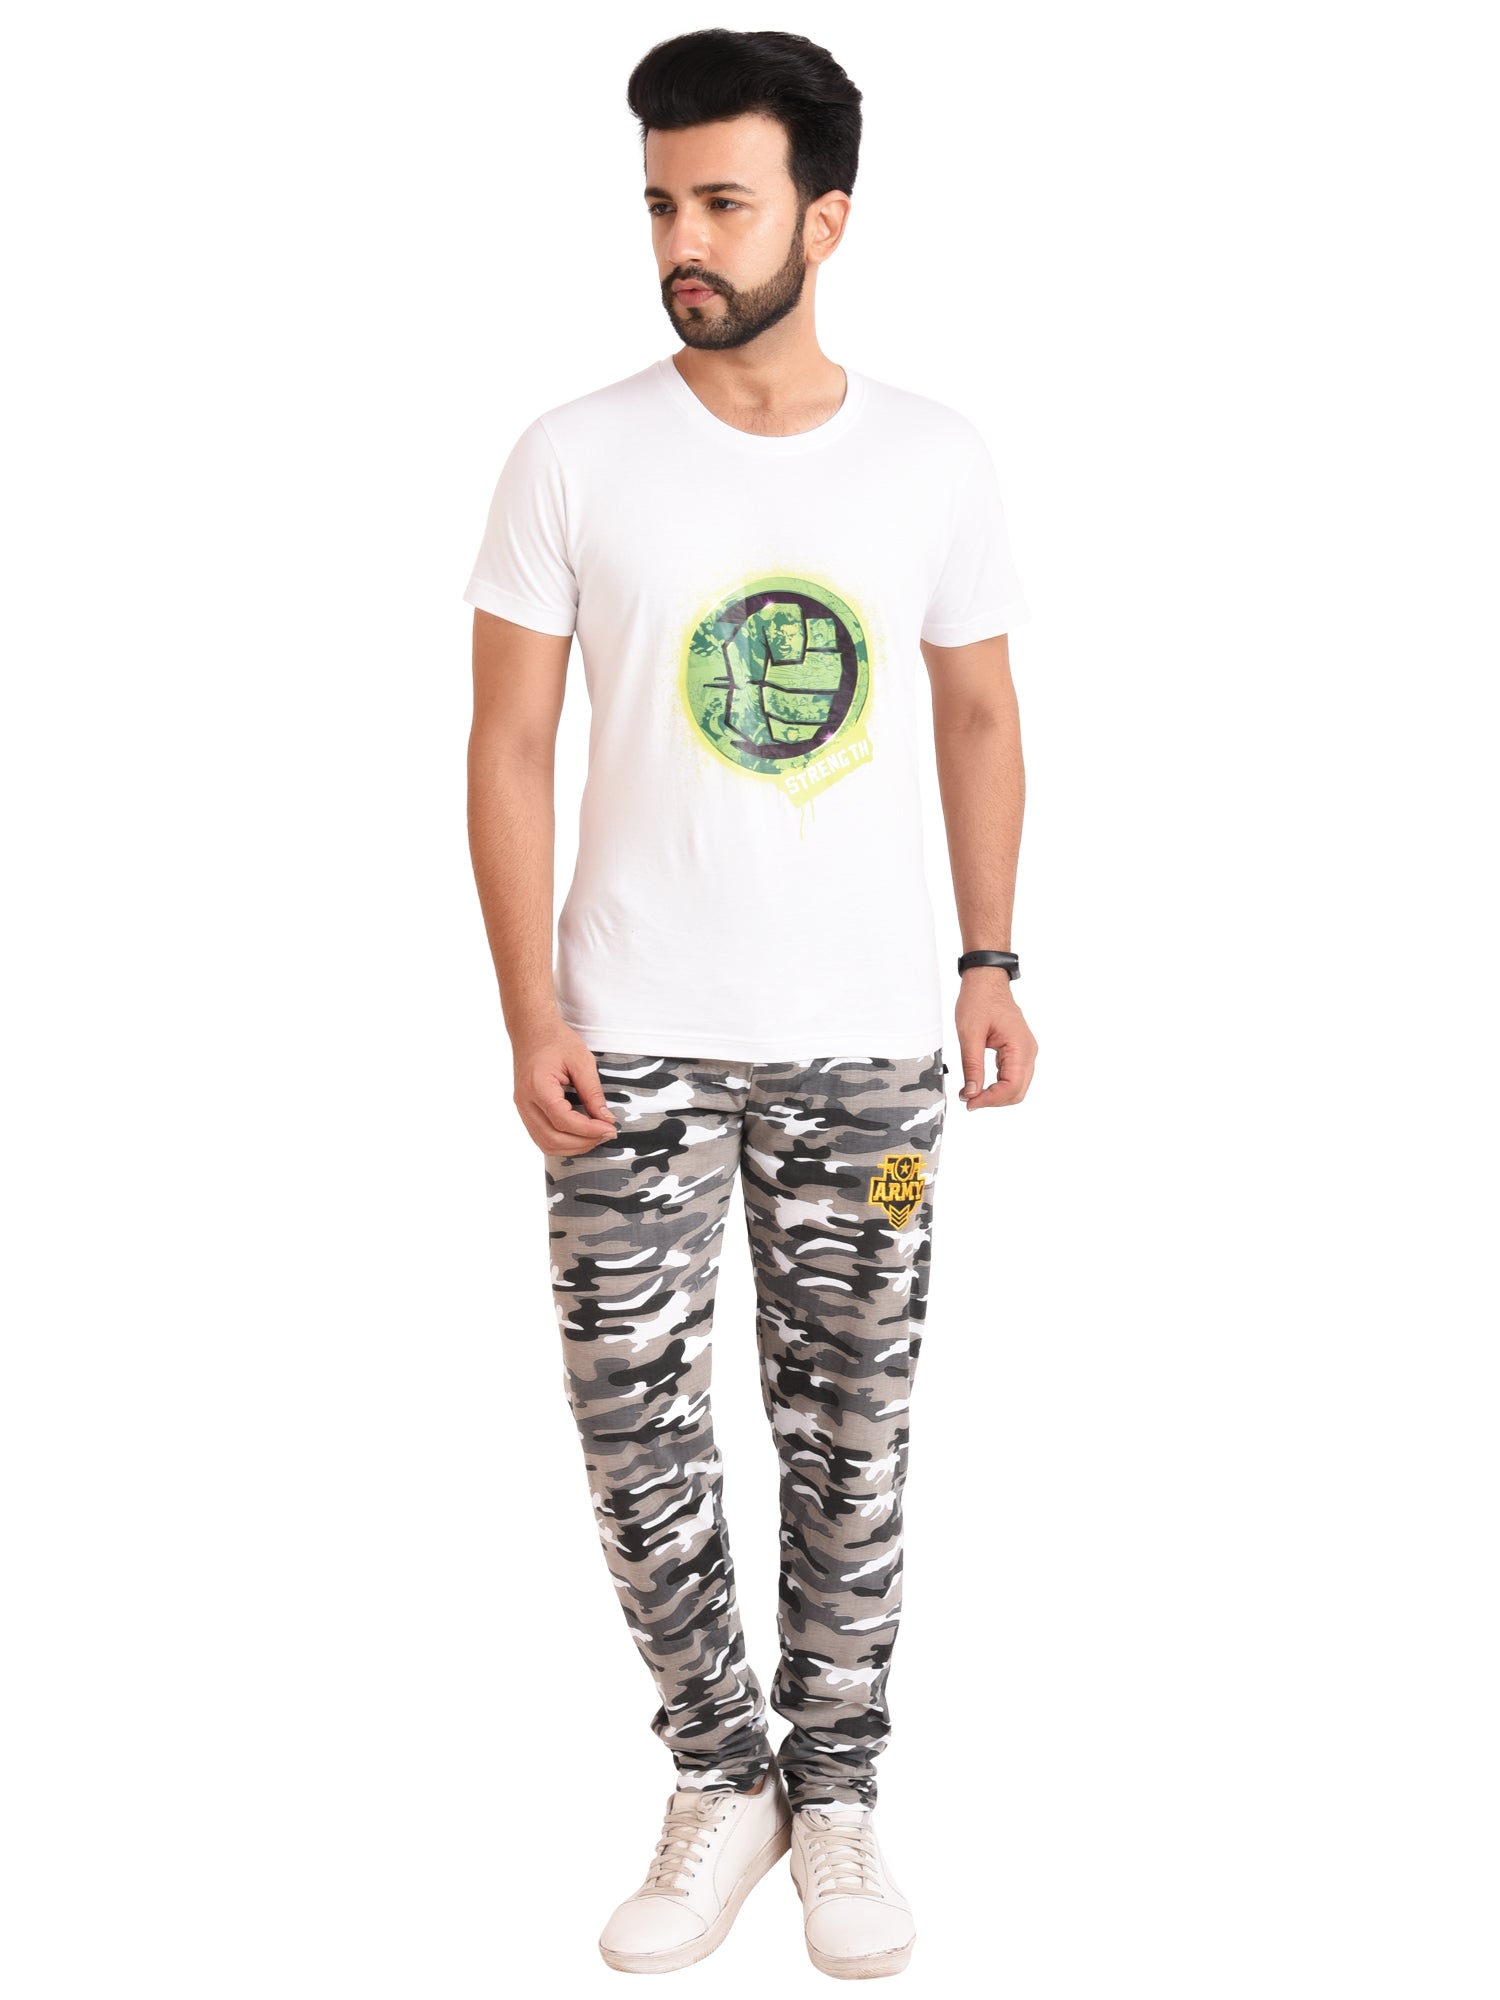 Jogger BLACK AND WHITE CAMOUFLAGE PRINT WITH GRIP LOWER - Militaryshop